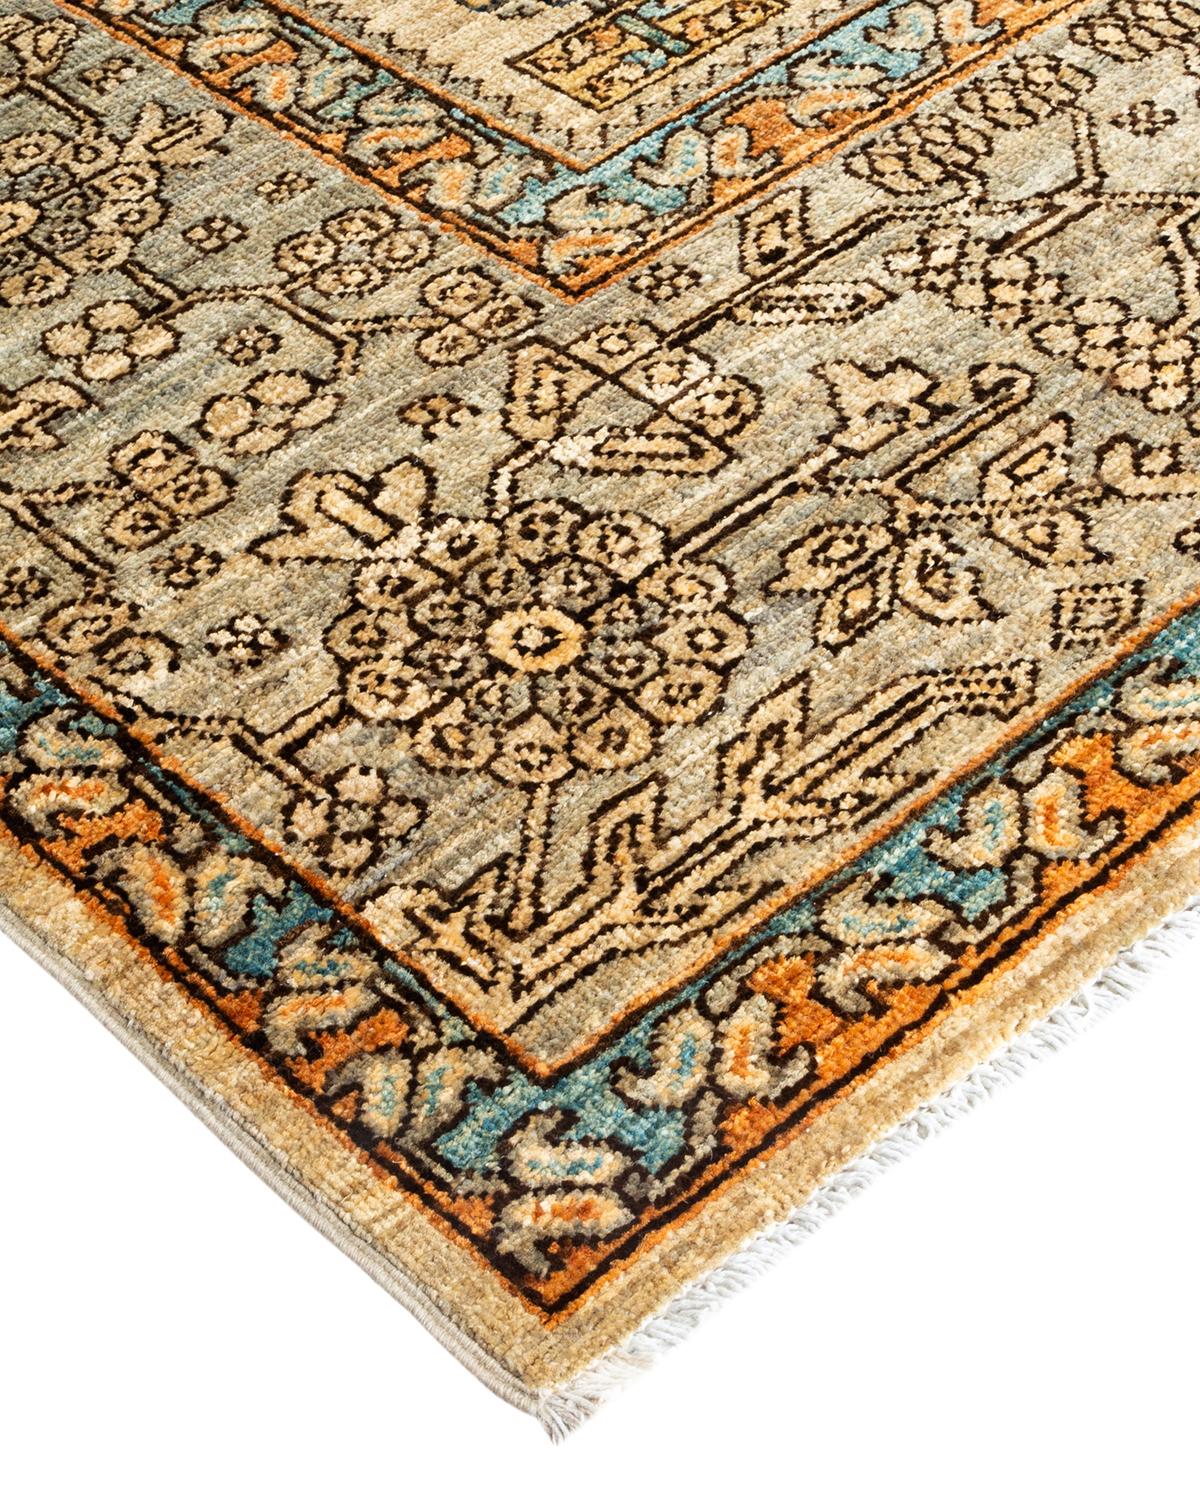 The rich textile tradition of western Africa inspired the Tribal collection of Hand-Knotted rugs. Incorporating a medley of geometric motifs, in palettes ranging from earthy to vivacious, these rugs bring a sense of energy as well as plush texture